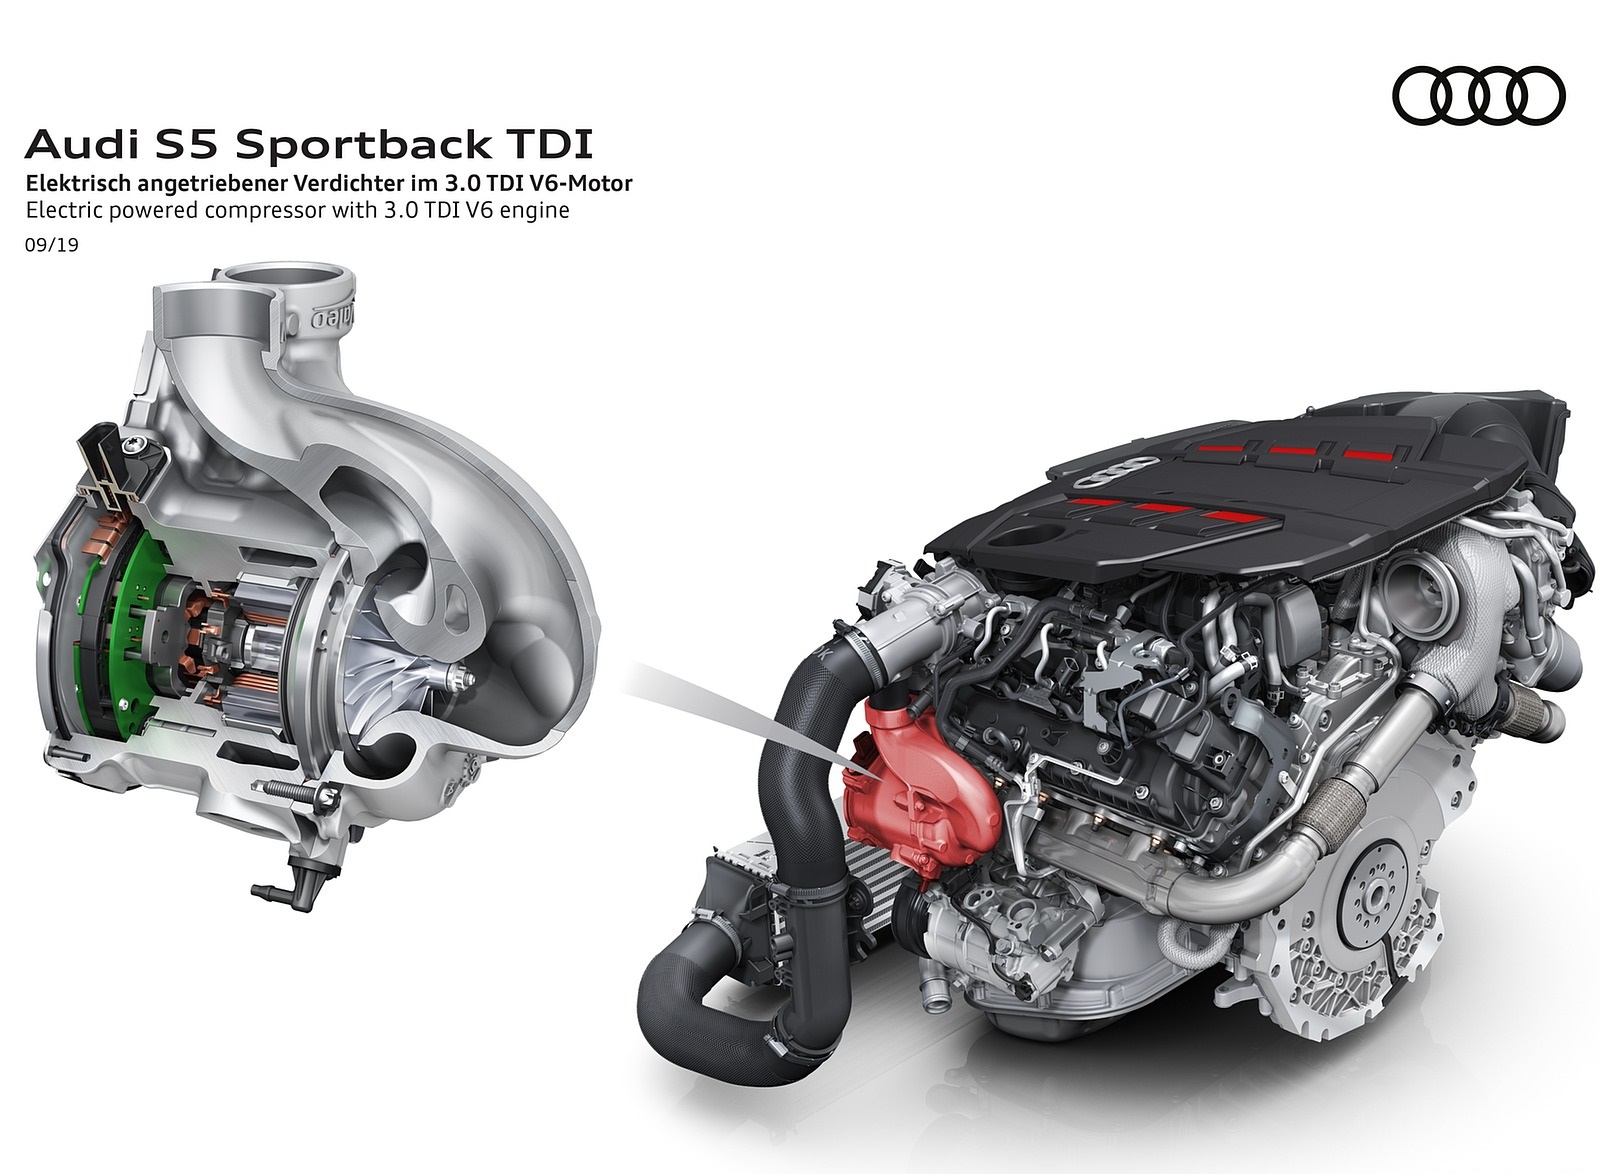 2020 Audi S5 Sportback TDI Electric powered compressor with 3.0 TDI V6 engine Wallpapers #27 of 29